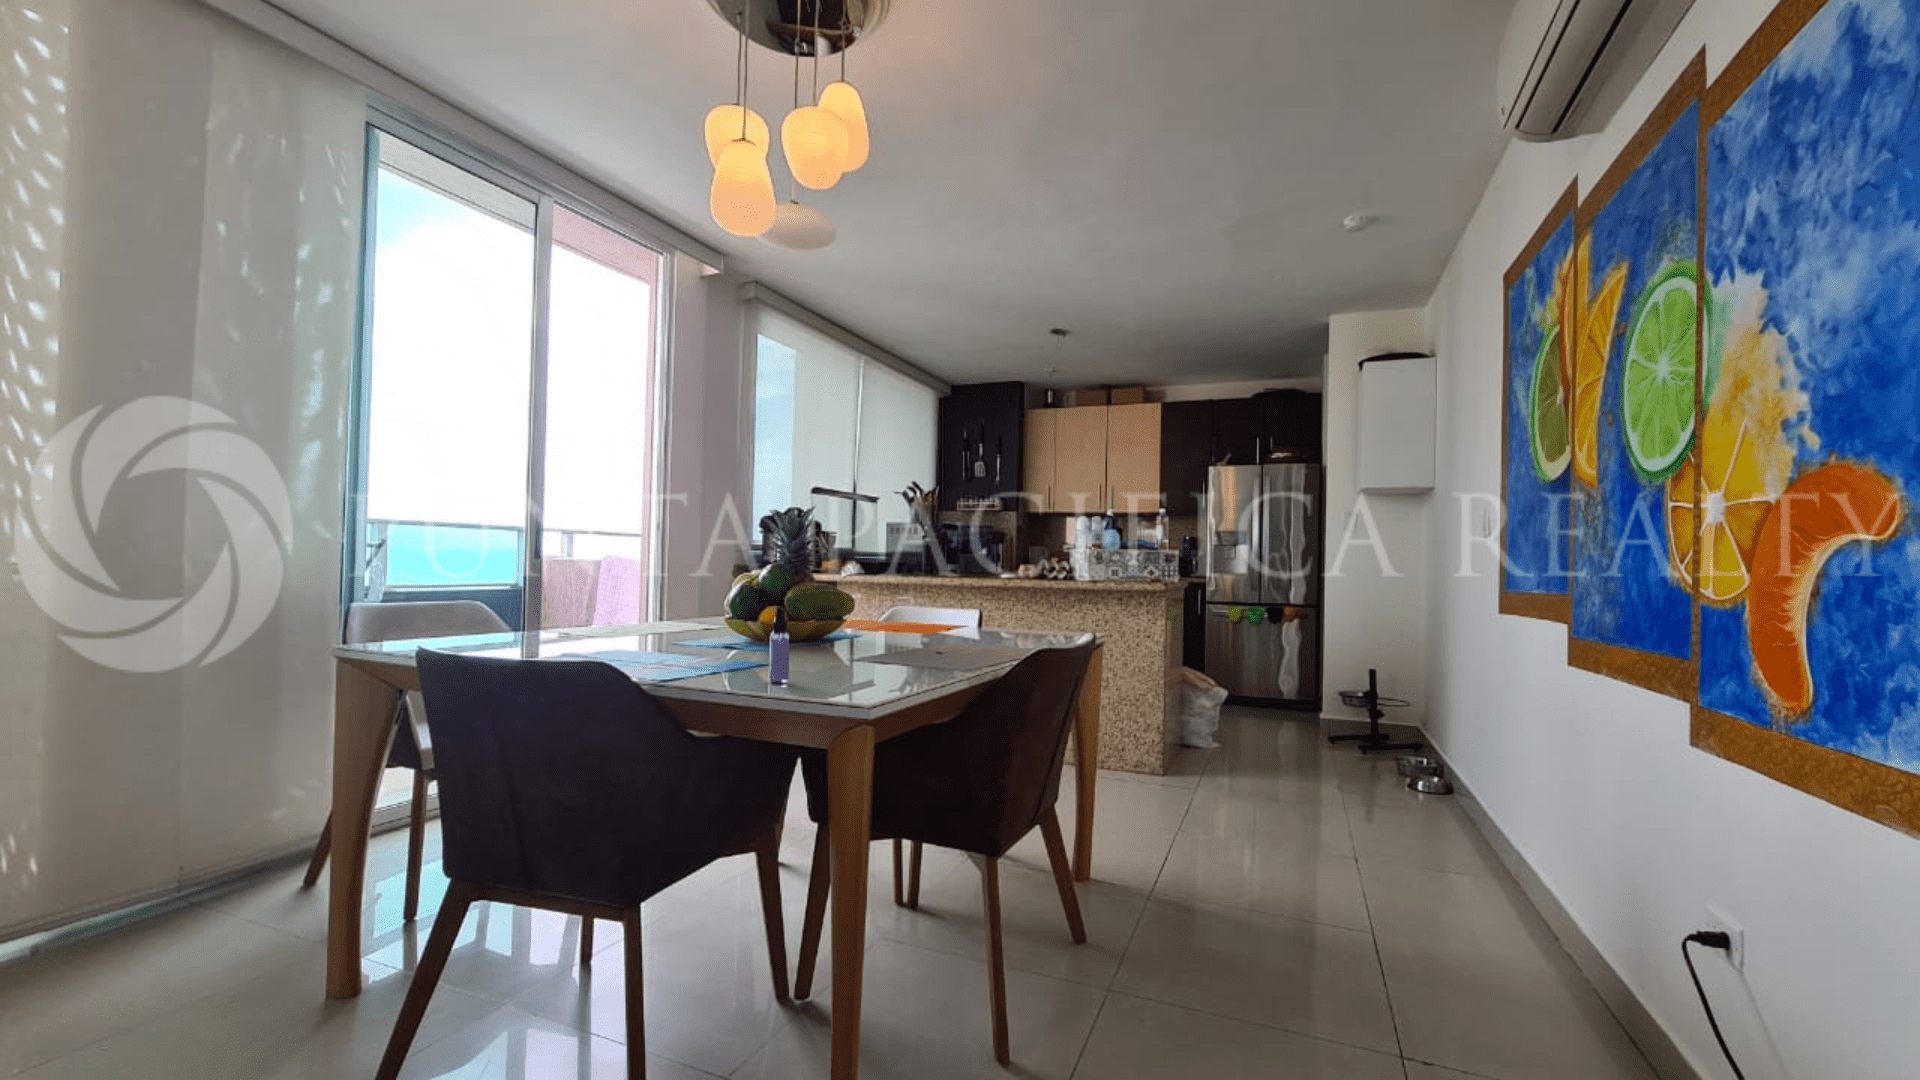 For Sale | 2 Bedroom Apartment | Great Location | PH Sevilla Towers ...